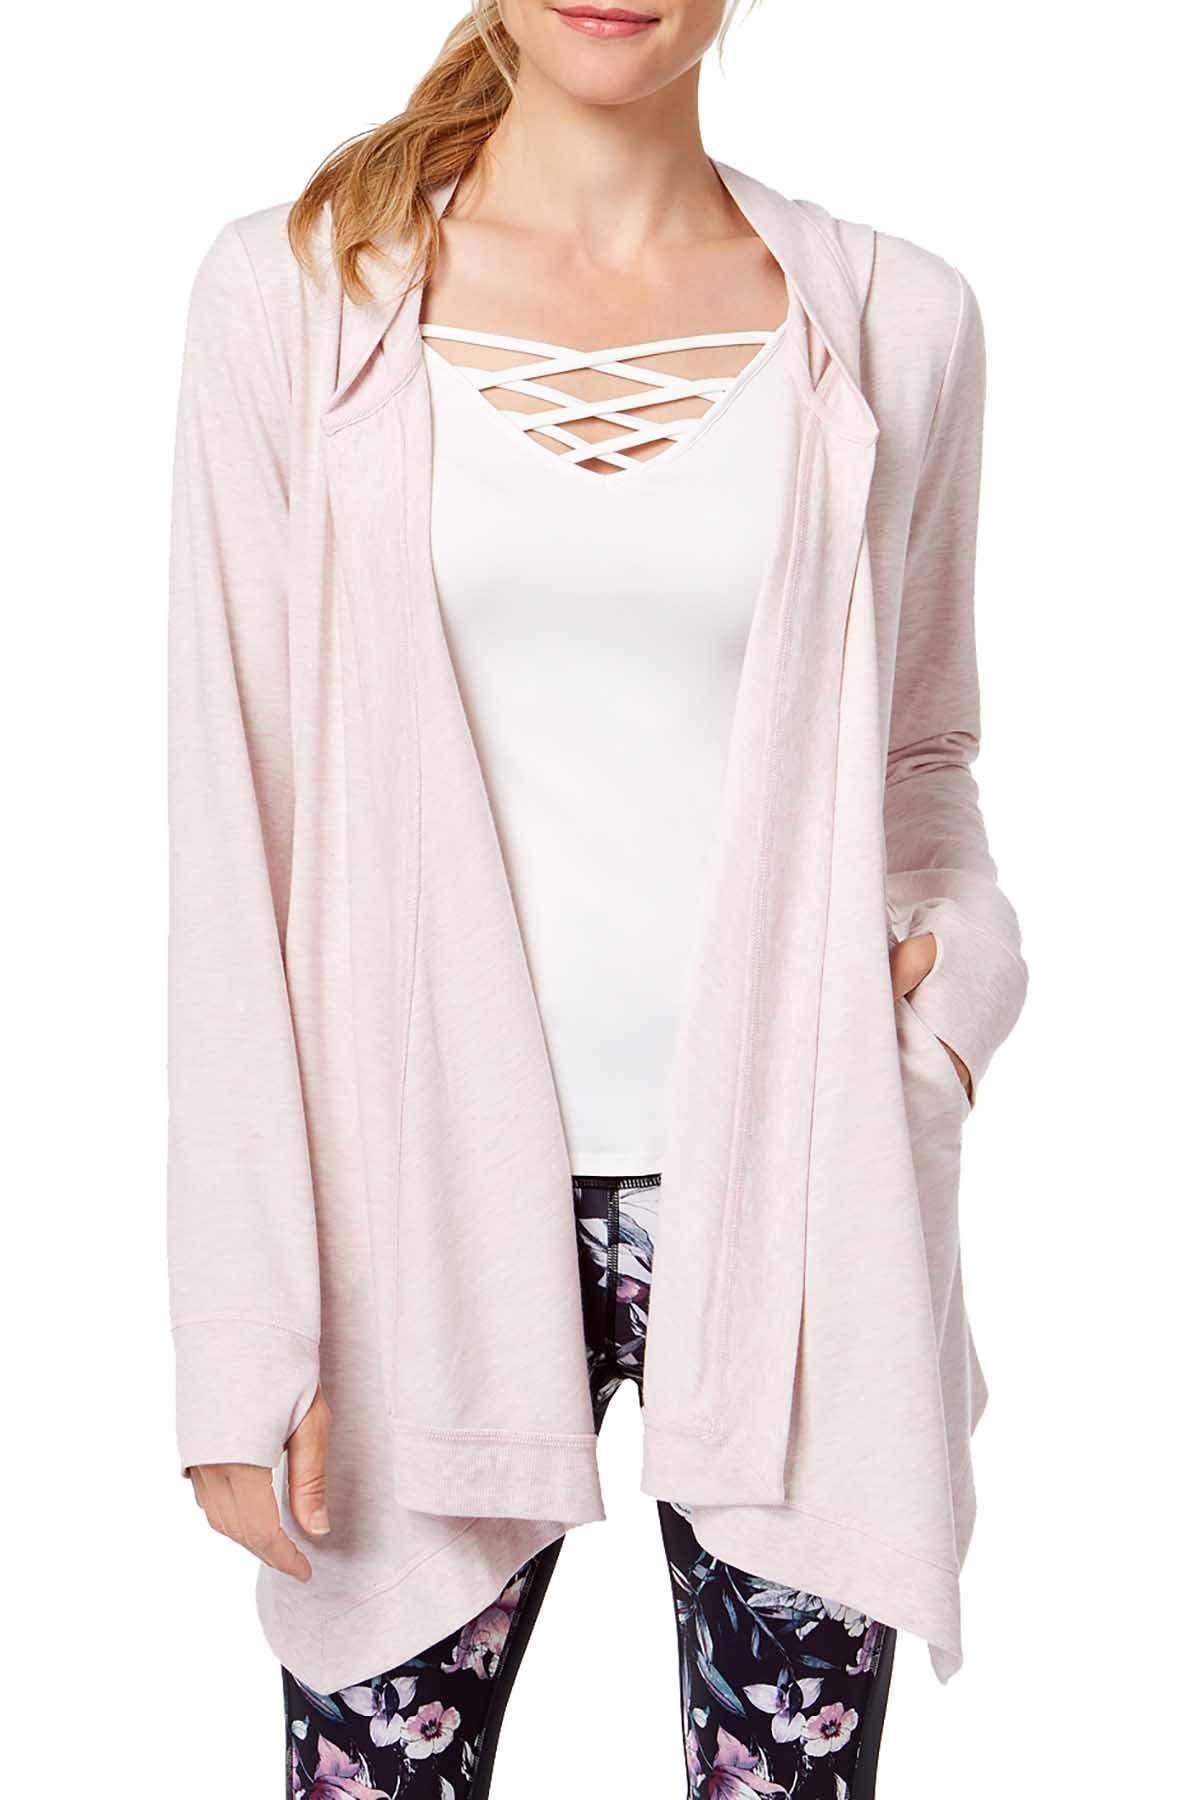 Ideology Posy Pink Heather Hooded Wrap